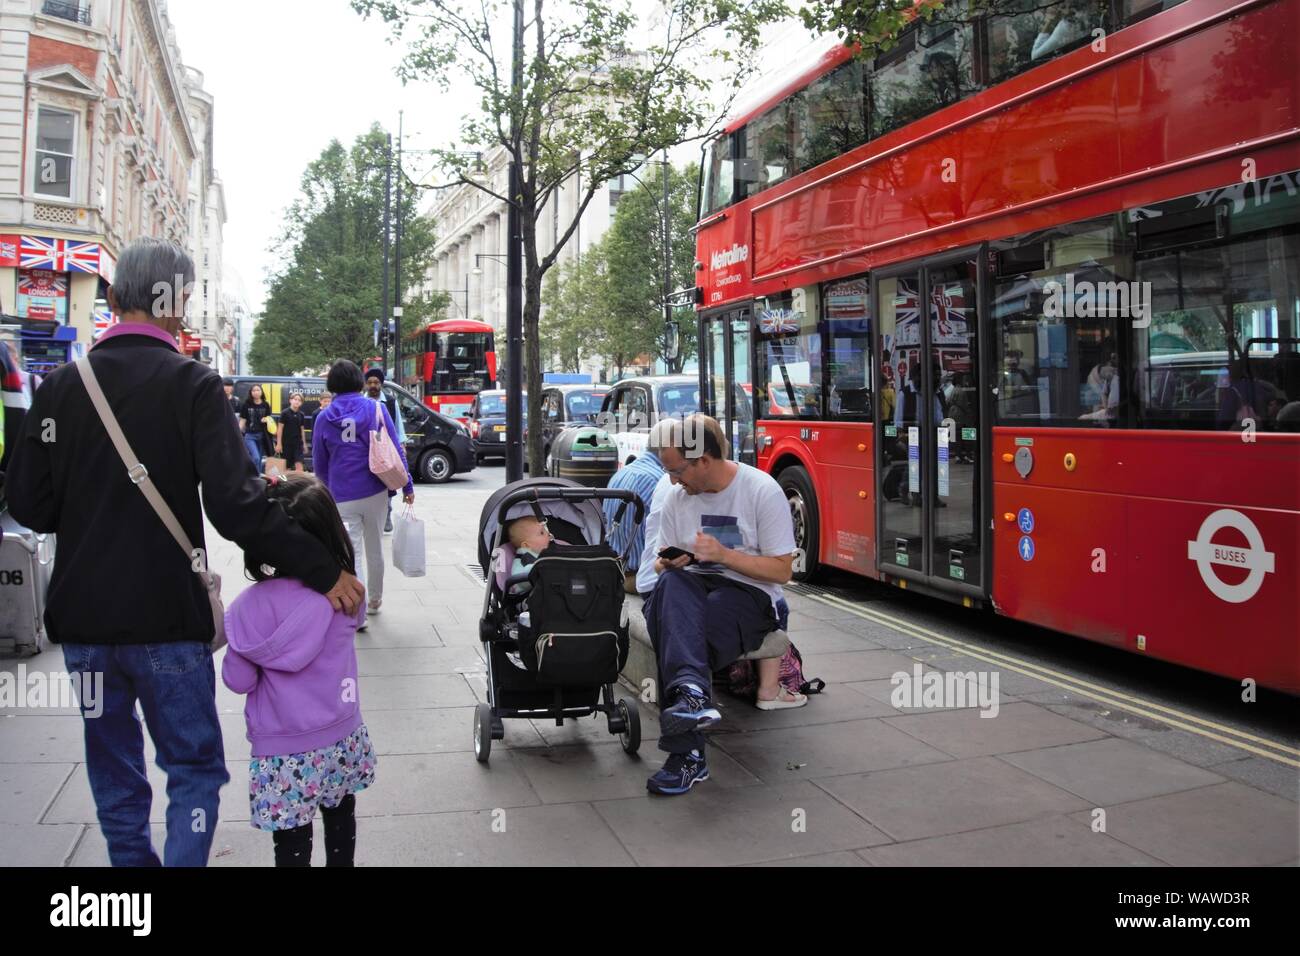 A man is sitting on a bench in Oxford Street on a busy day while looking after a baby in a pram, London, UK Stock Photo